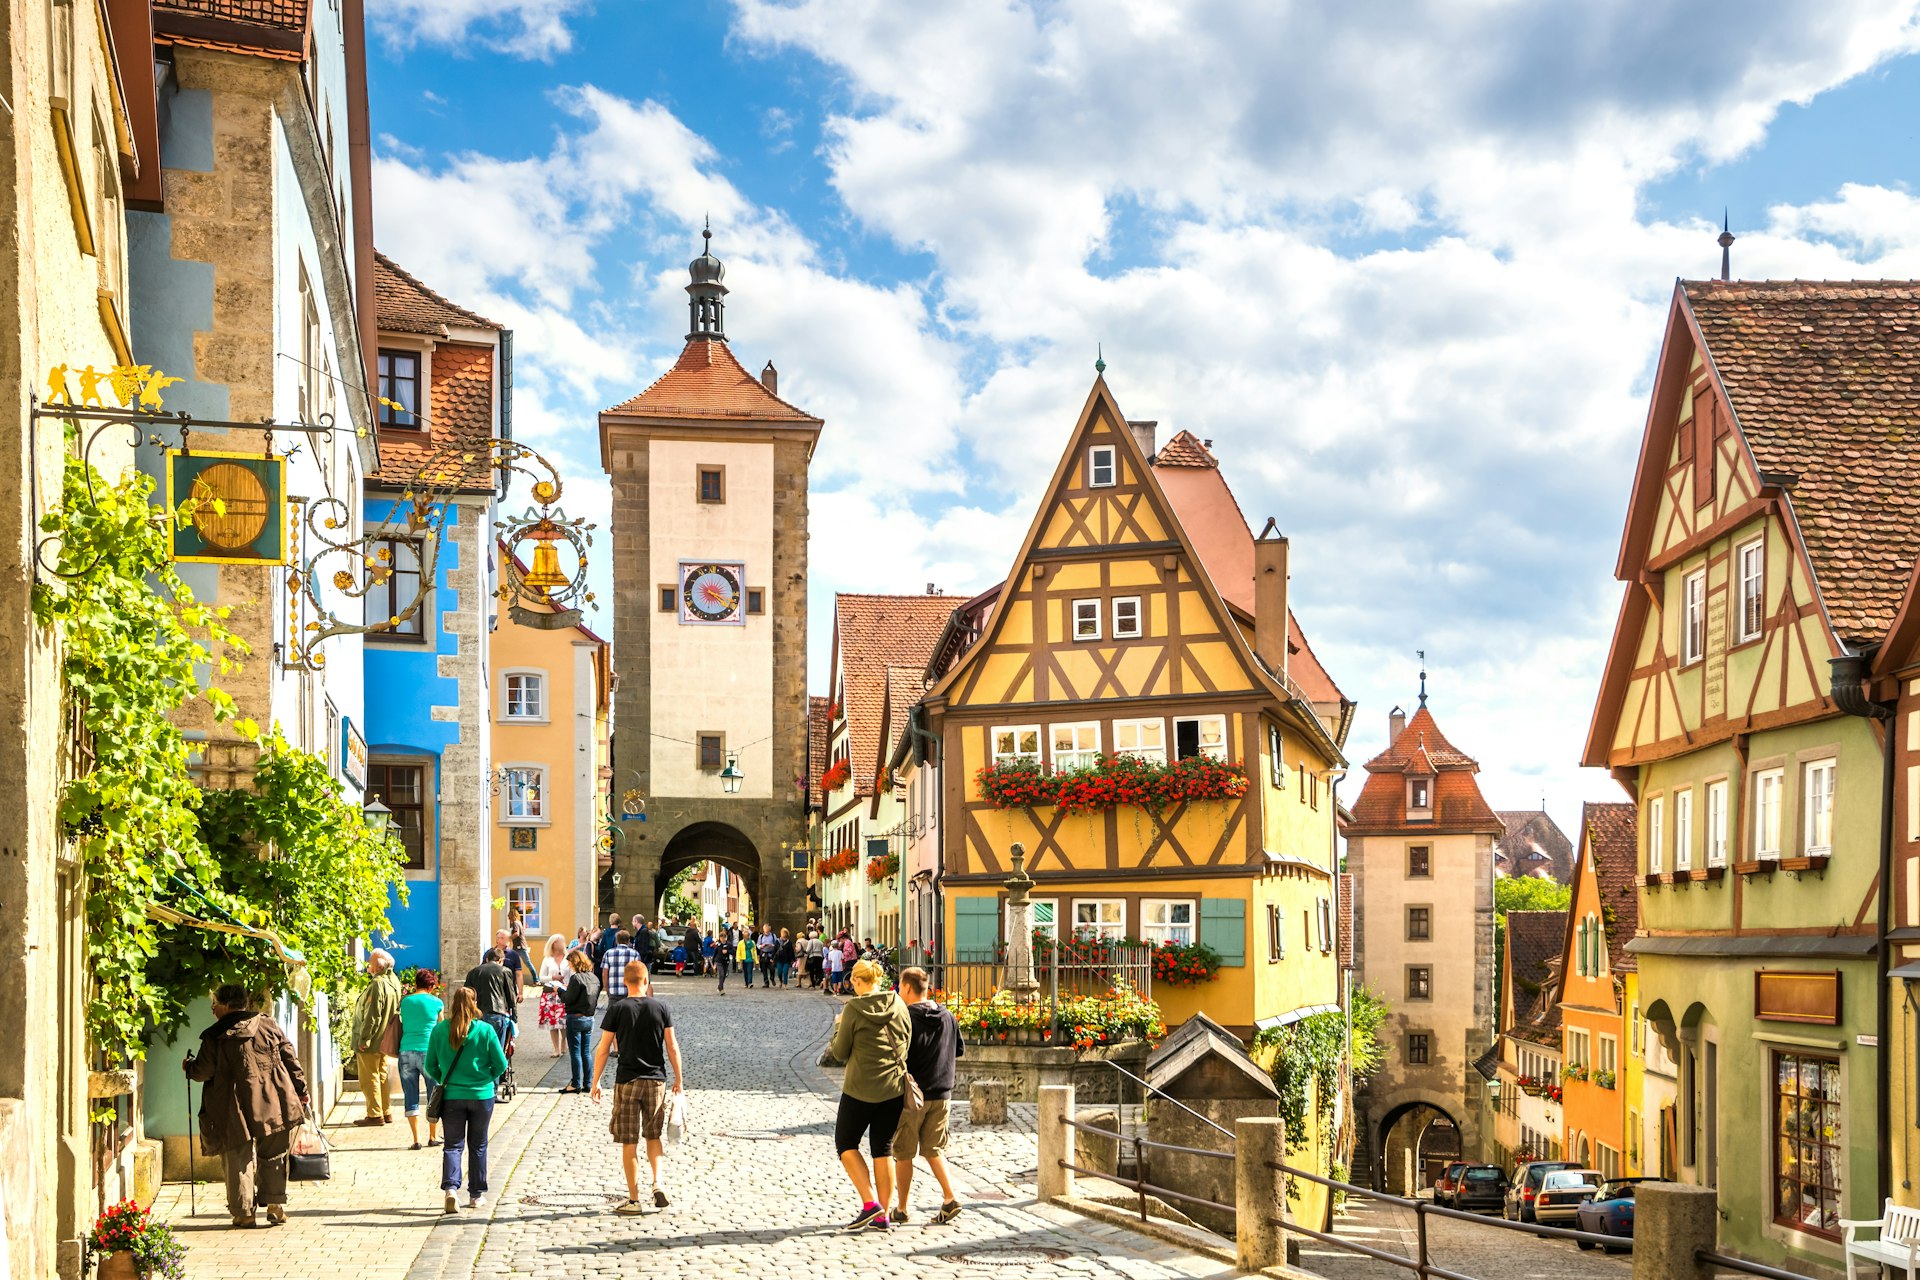 Timber framed houses and a clock tower in Rothenburg ob der Tauber